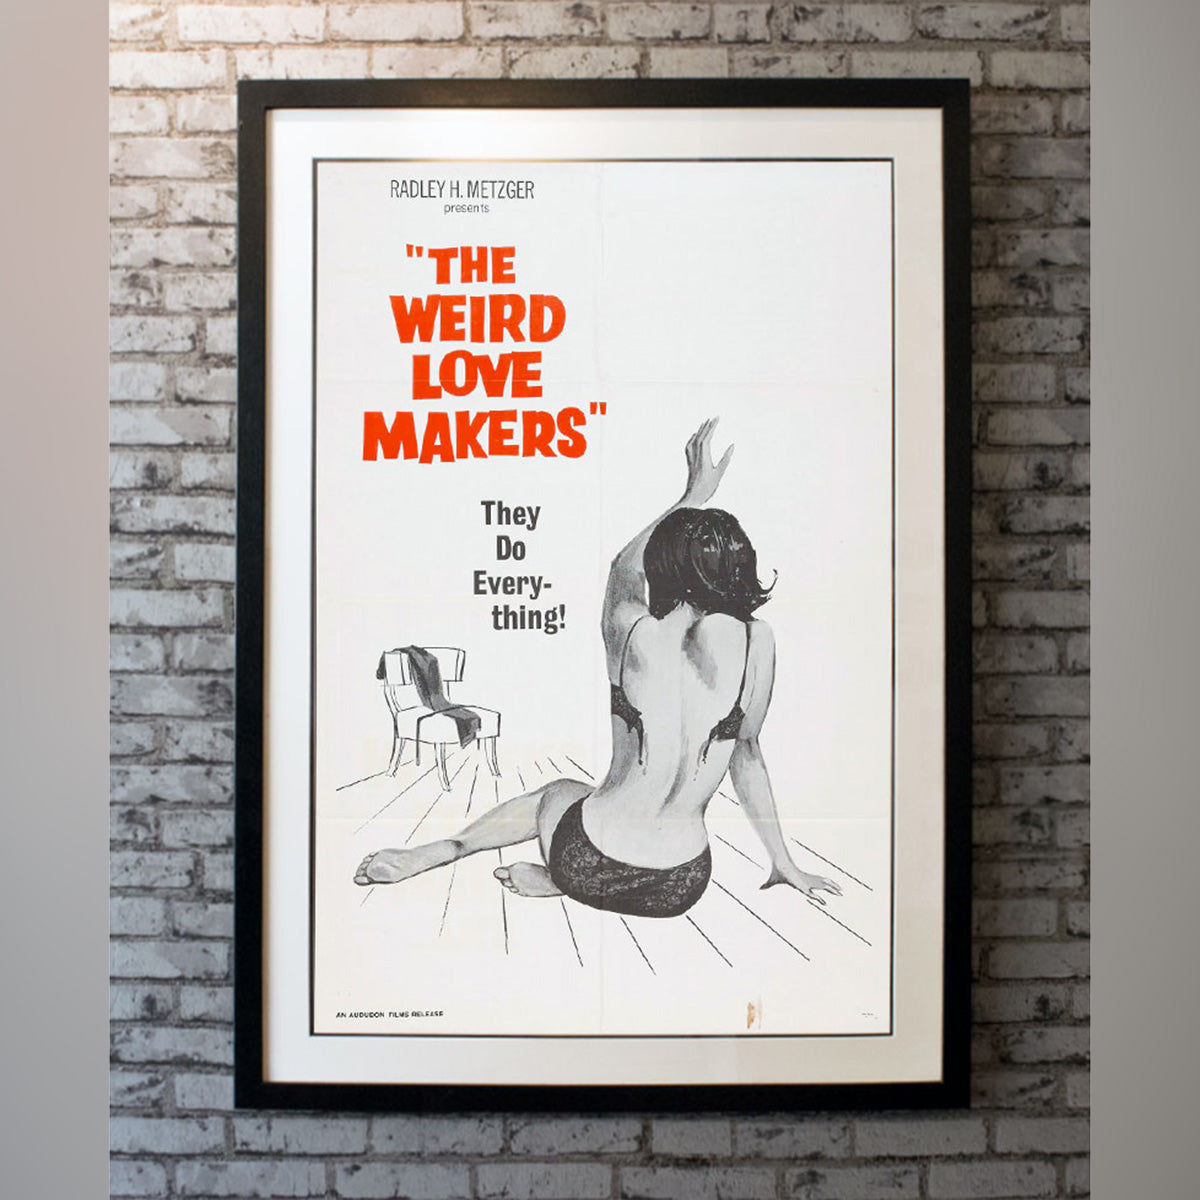 Original Movie Poster of Weird Love Makers, The (1960)